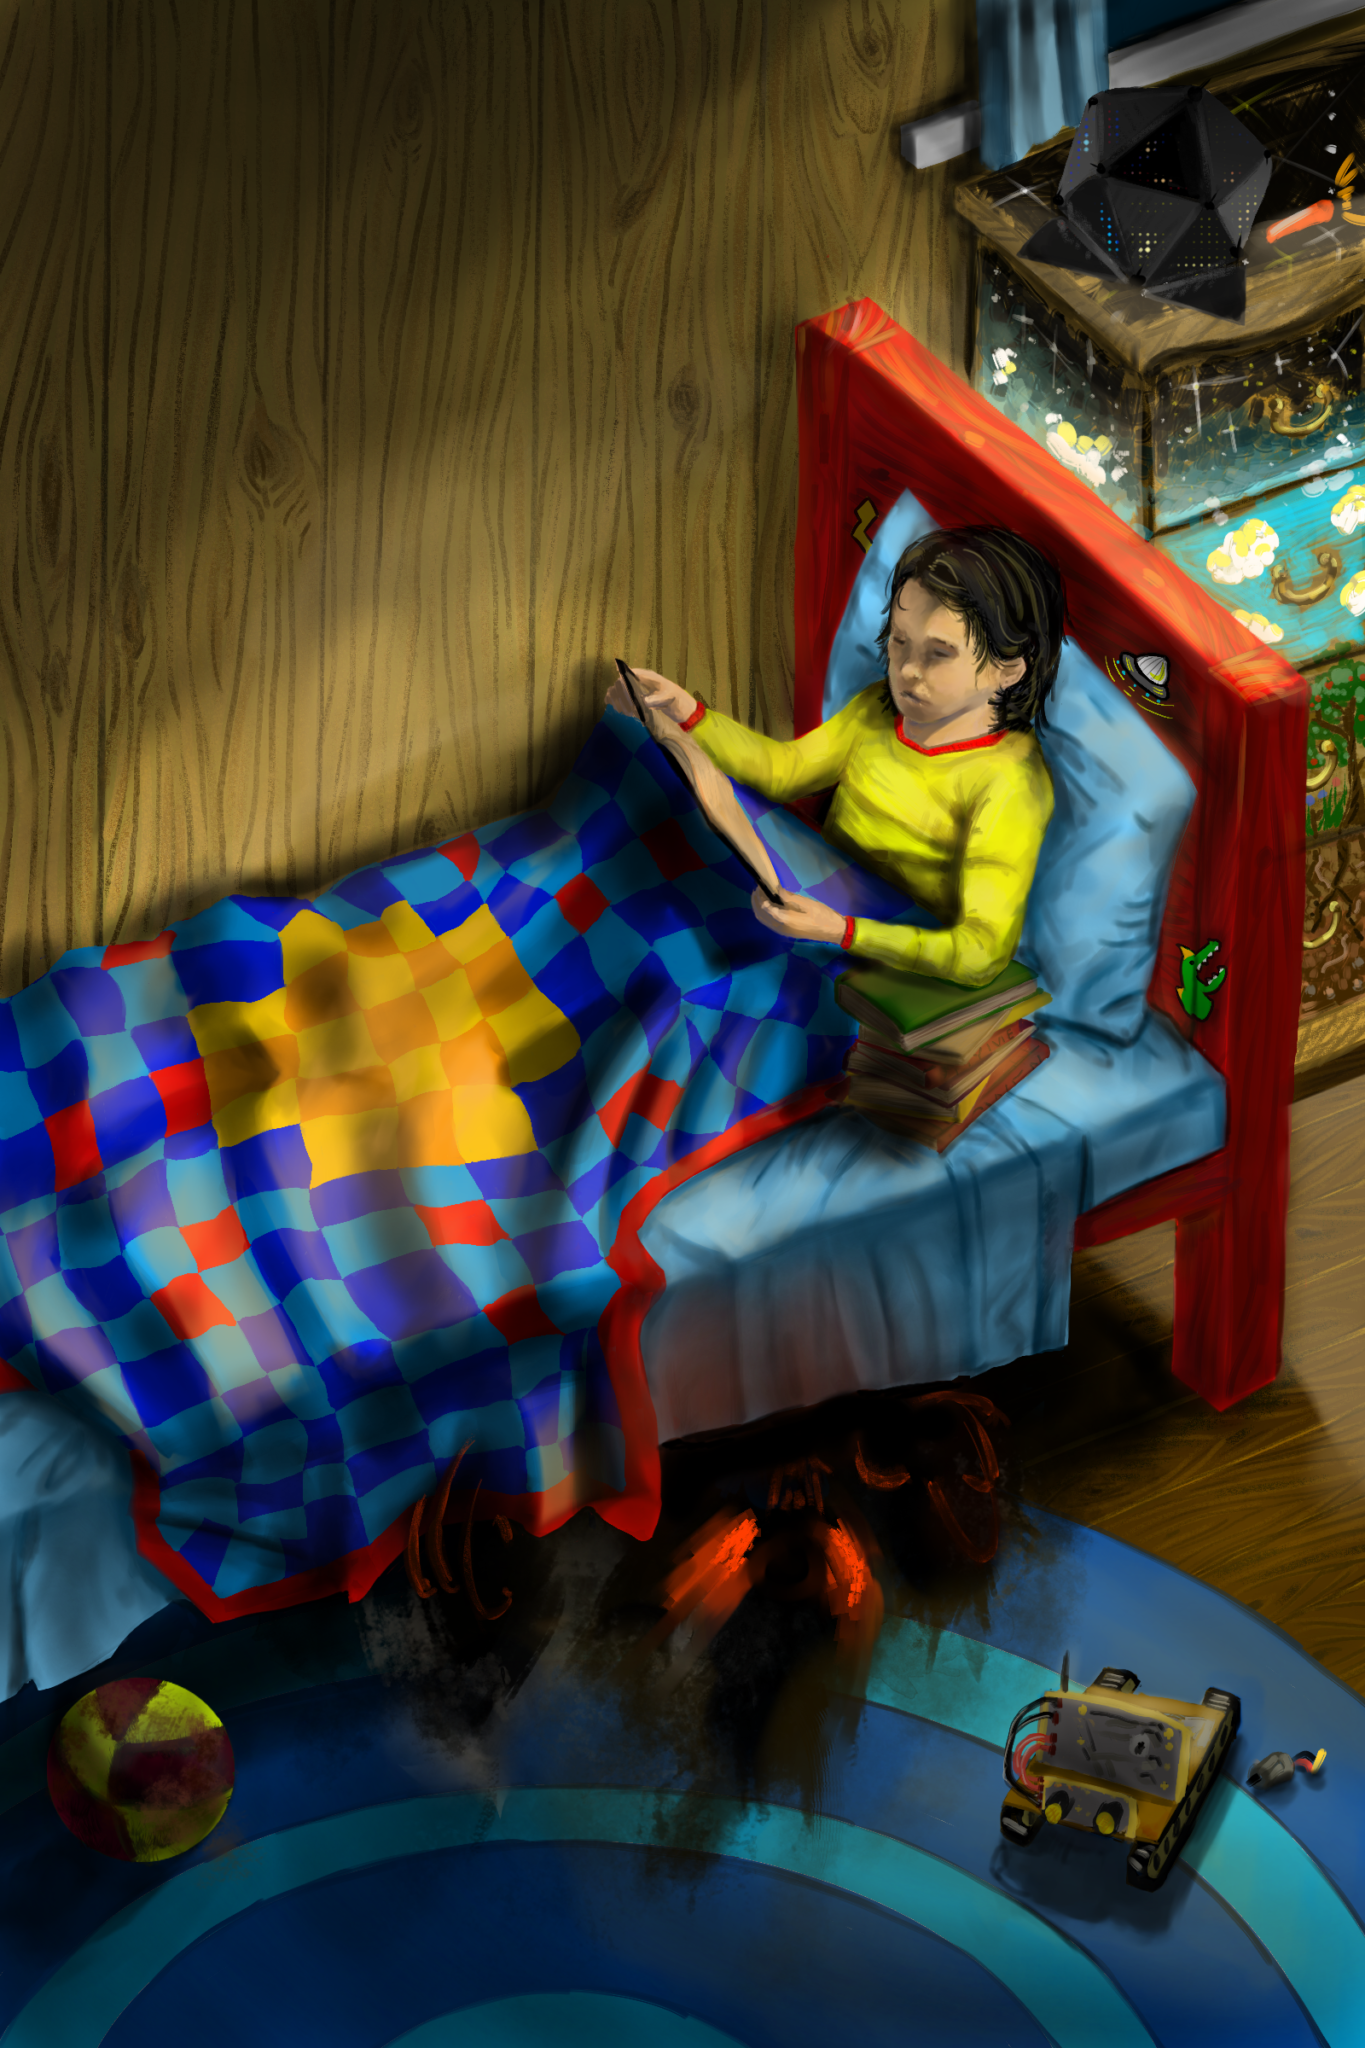 A boy sits on his bed reading, while a shadow monster appears underneath the bed frame.